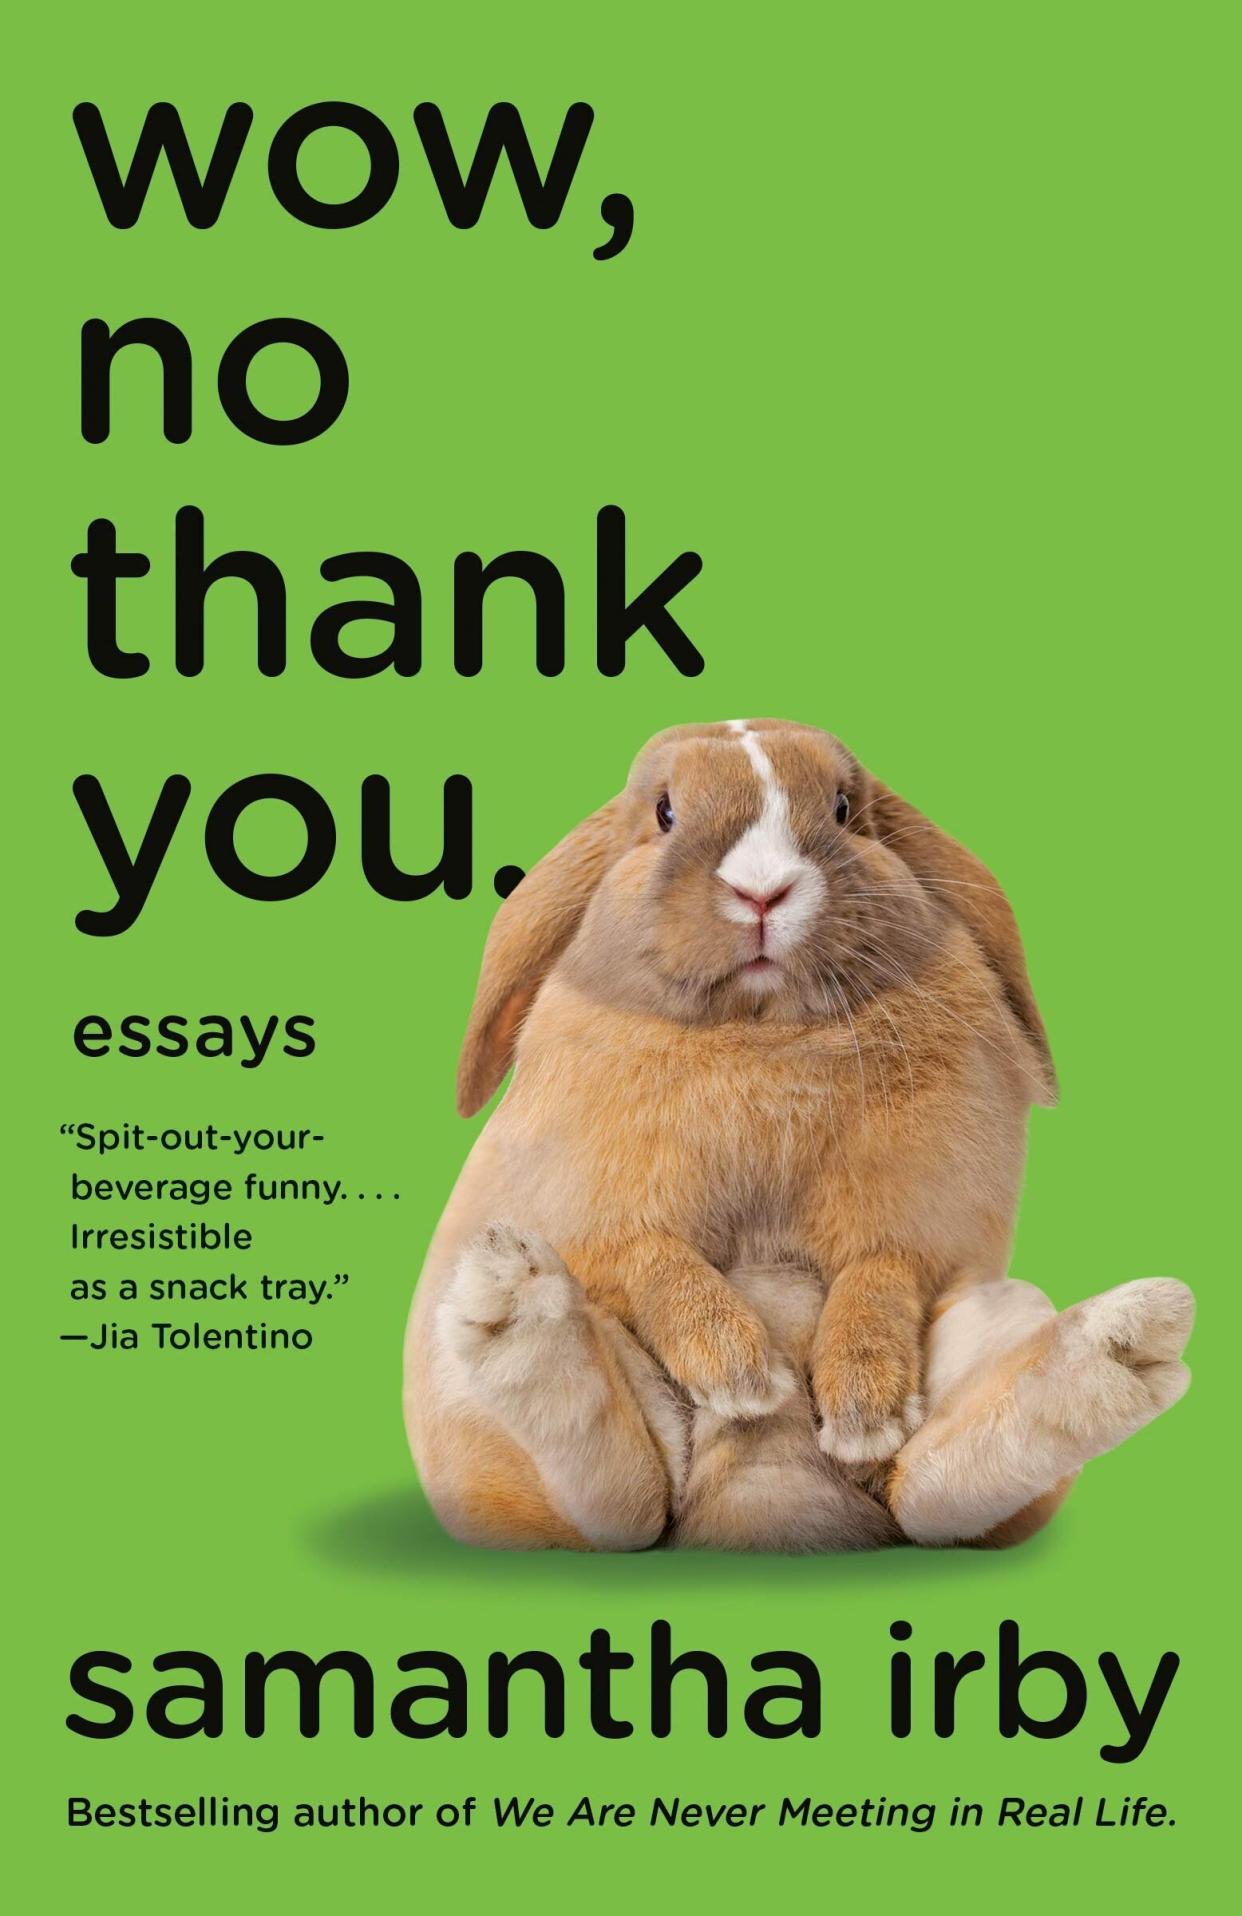 The essays in "Wow, No Thank You." deal with "aging, marriage, settling down with step-children in white, small-town America," according to <a href="https://www.goodreads.com/book/show/49960031-wow-no-thank-you" target="_blank" rel="noopener noreferrer">Goodreads</a>. The collection made it into our "most anticipated" list <a href="https://www.huffpost.com/entry/top-march-2020-book-releases_l_5e5d87adc5b63aaf8f5bbc7a" target="_blank" rel="noopener noreferrer">back in March</a>. <br /><br />You can read more about this book at <a href="https://www.goodreads.com/book/show/49960031-wow-no-thank-you" target="_blank" rel="noopener noreferrer">Goodreads</a> and find it for $13 at <a href="https://amzn.to/36YH2lF" target="_blank" rel="noopener noreferrer">Amazon</a>.